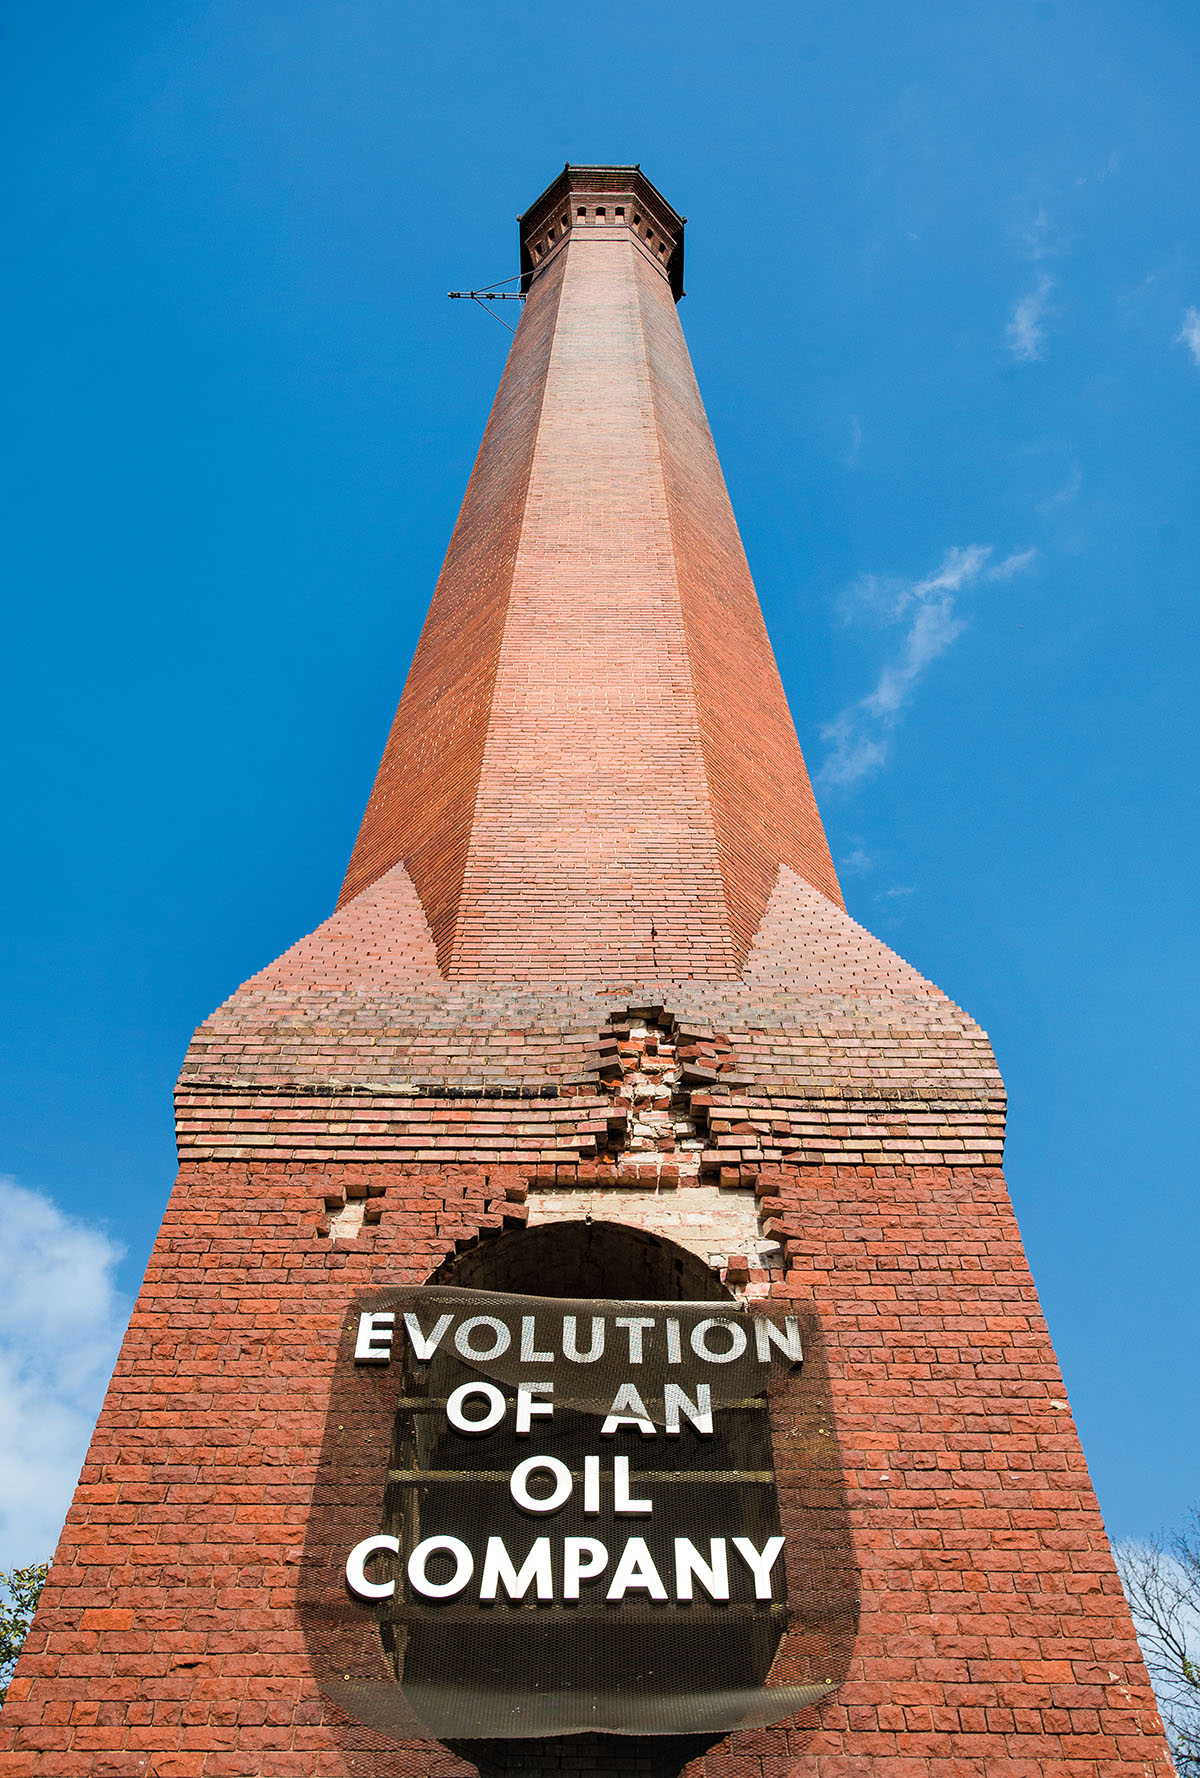 A tall brick smokestack with lettering on the front reading Evolution of an Oil Company